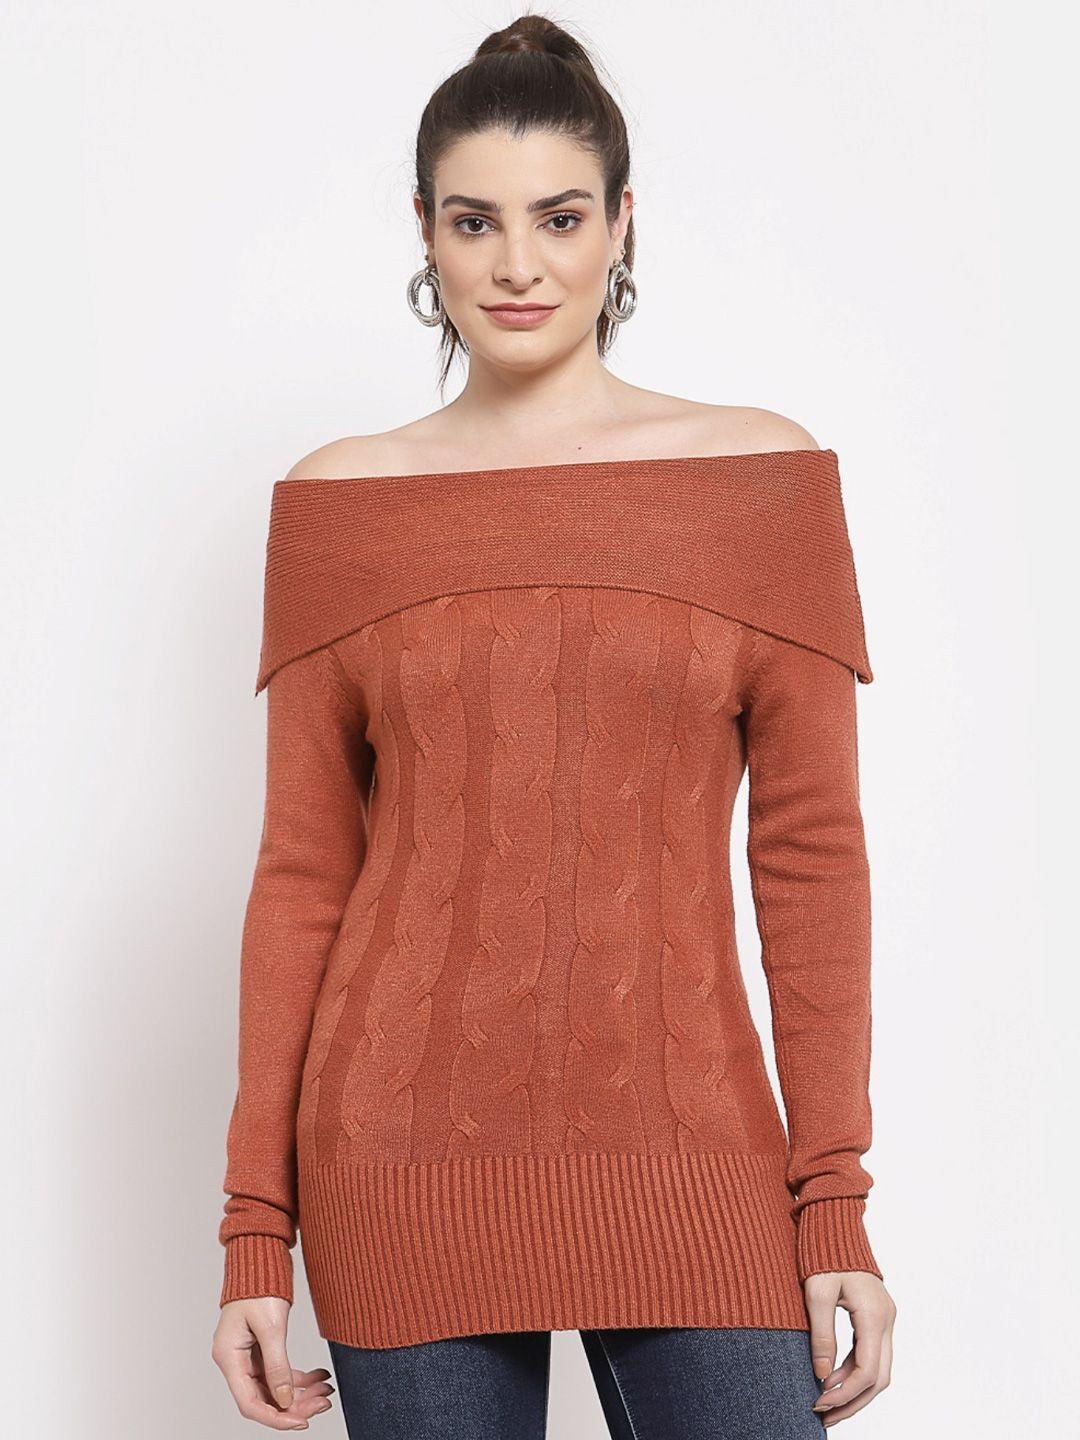 mafadeny women cable knit pullover